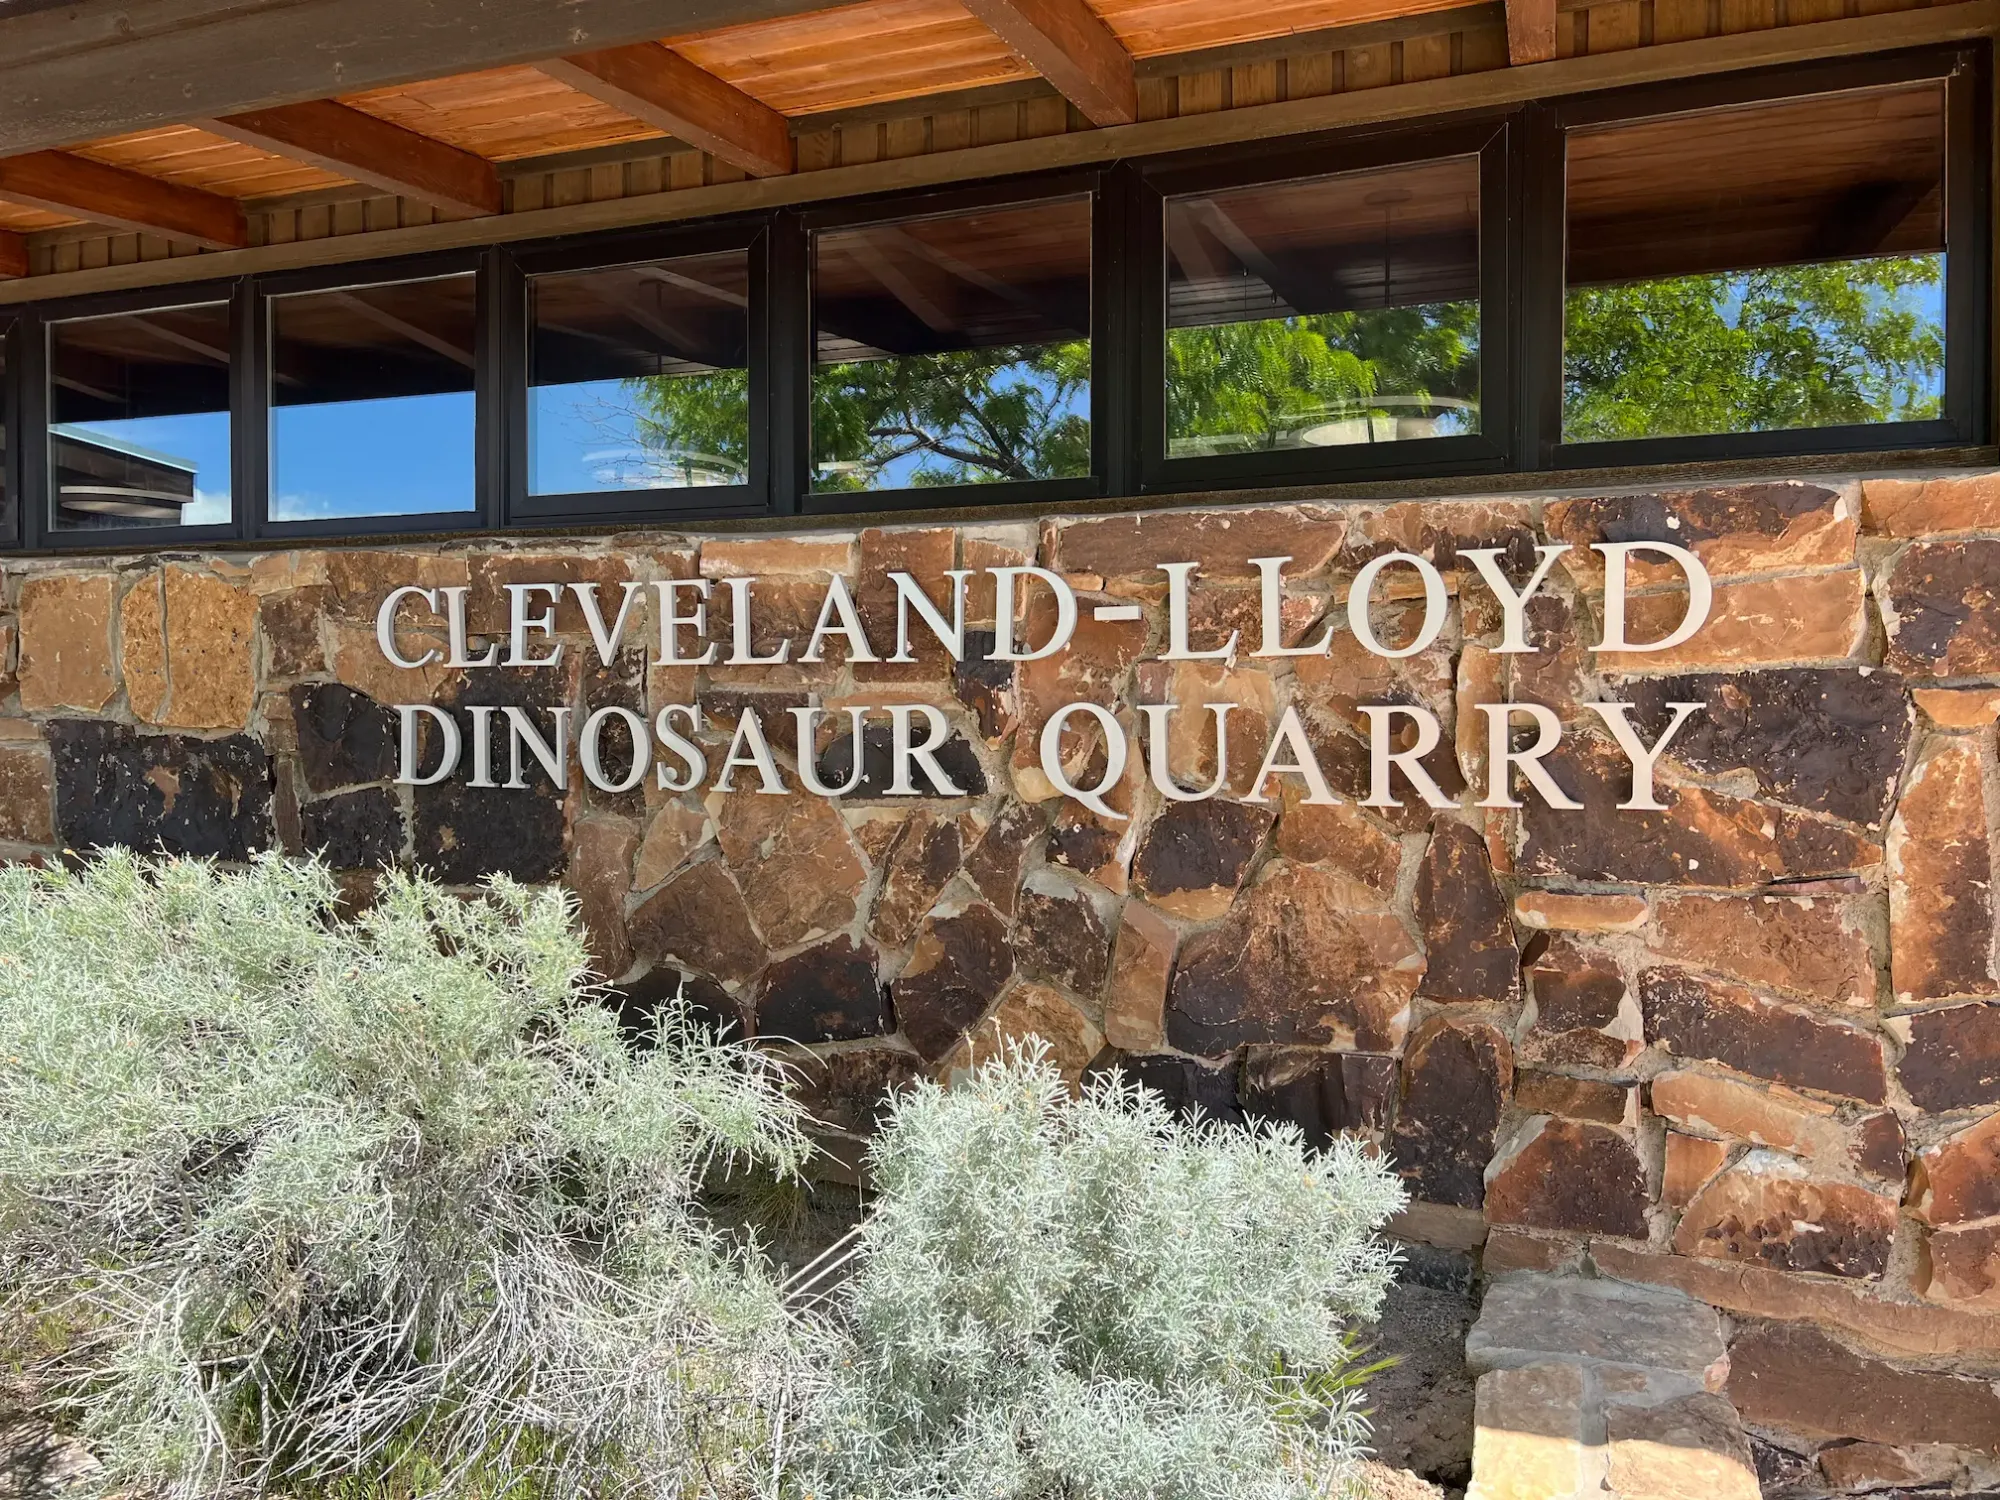 Guide to visiting the Cleveland Lloyd Dinosaur Quarry at Jurassic National Monument